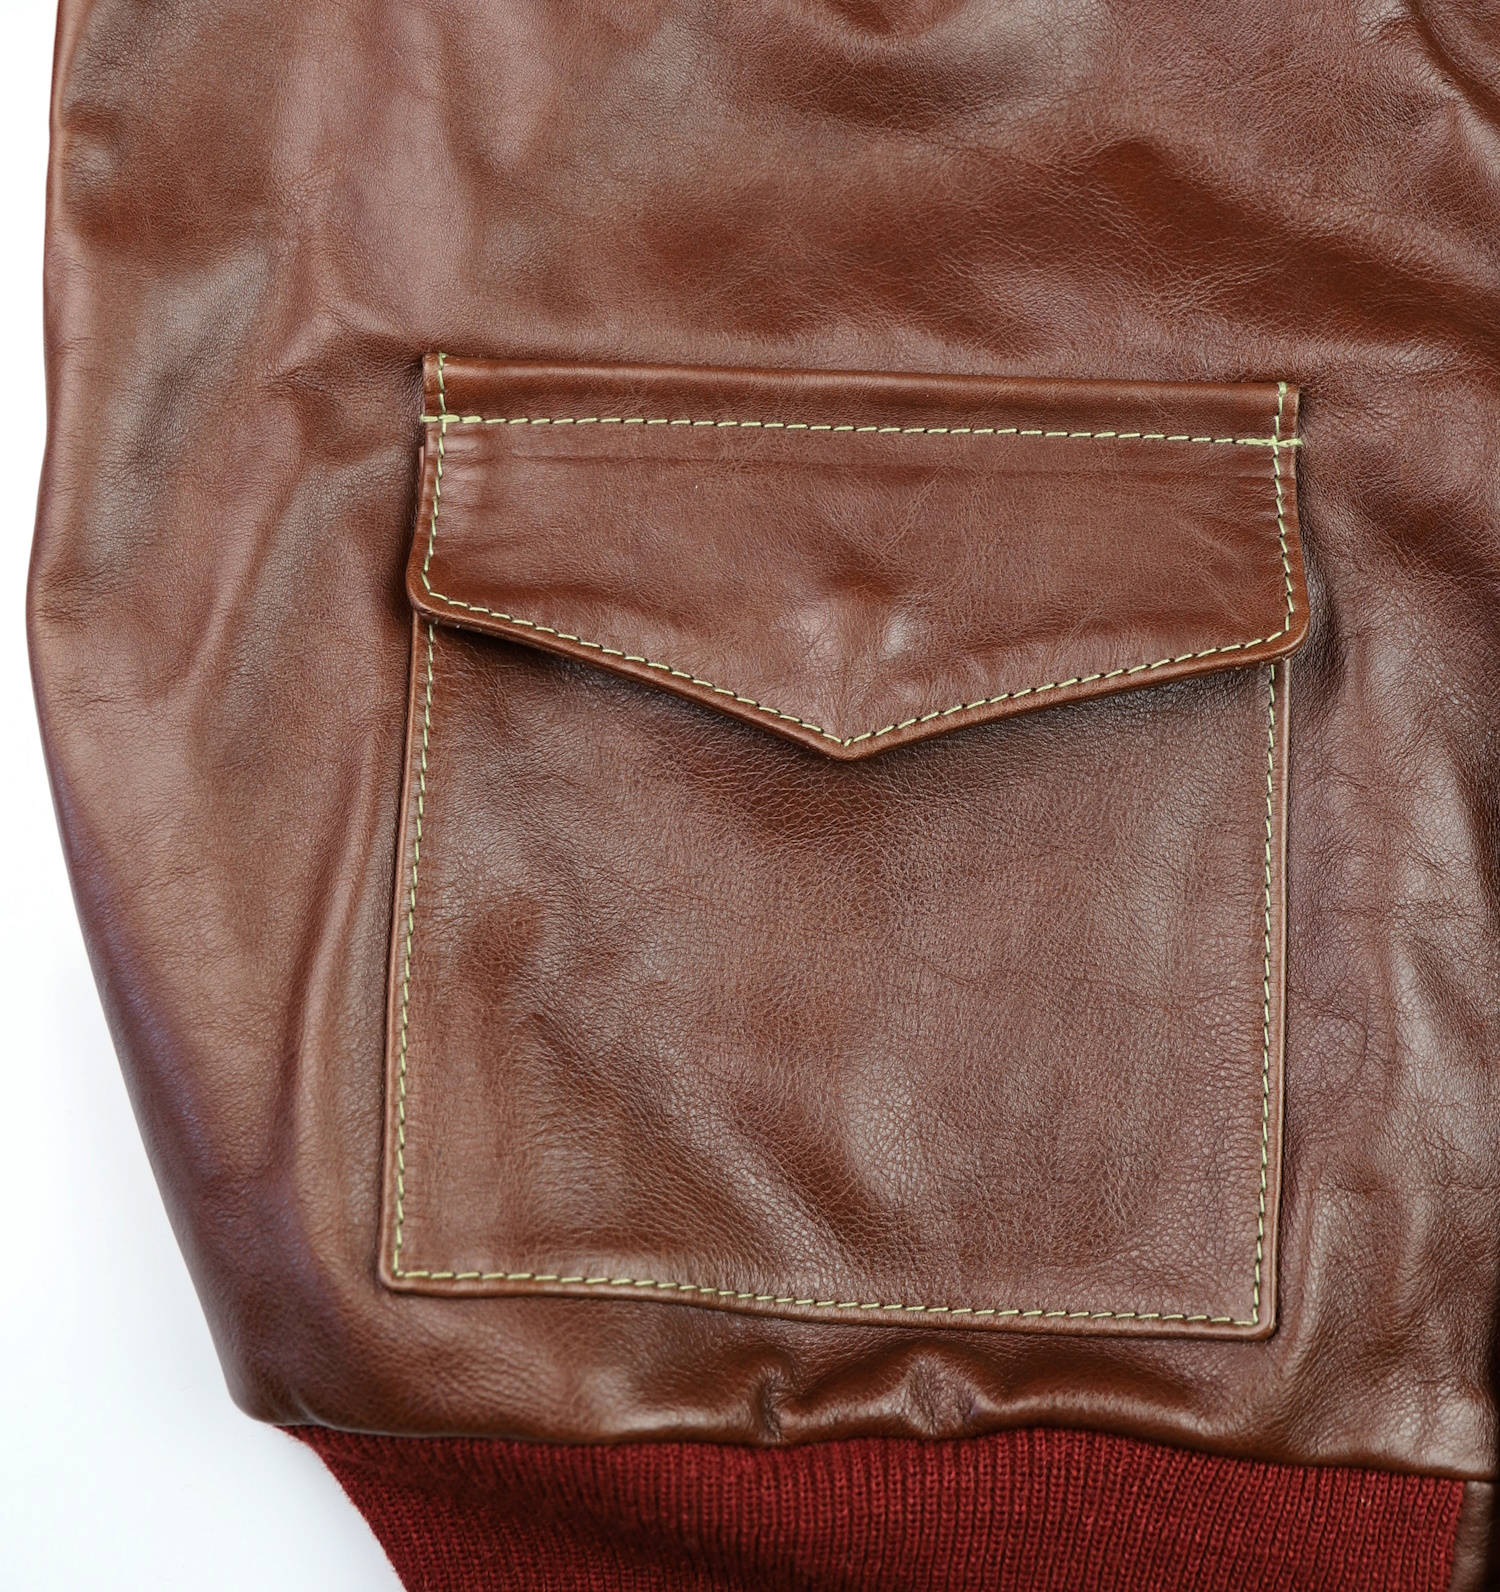 Aero A-2 18775 Russet Vicenza Horsehide AY2 patch pocket.jpg